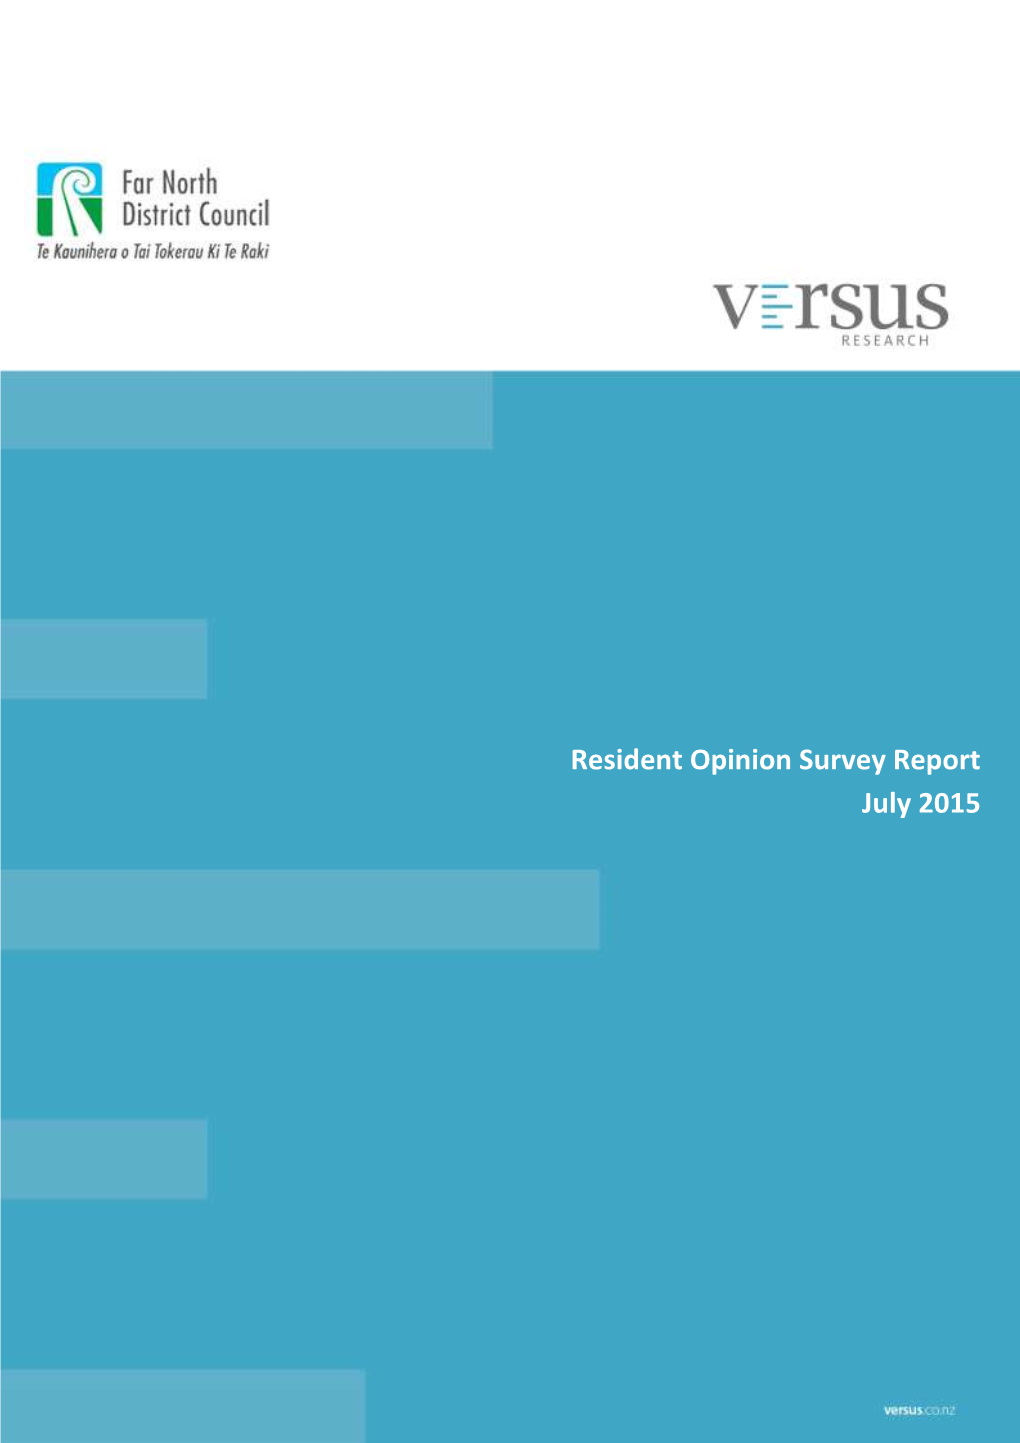 Resident Opinion Survey Report July 2015